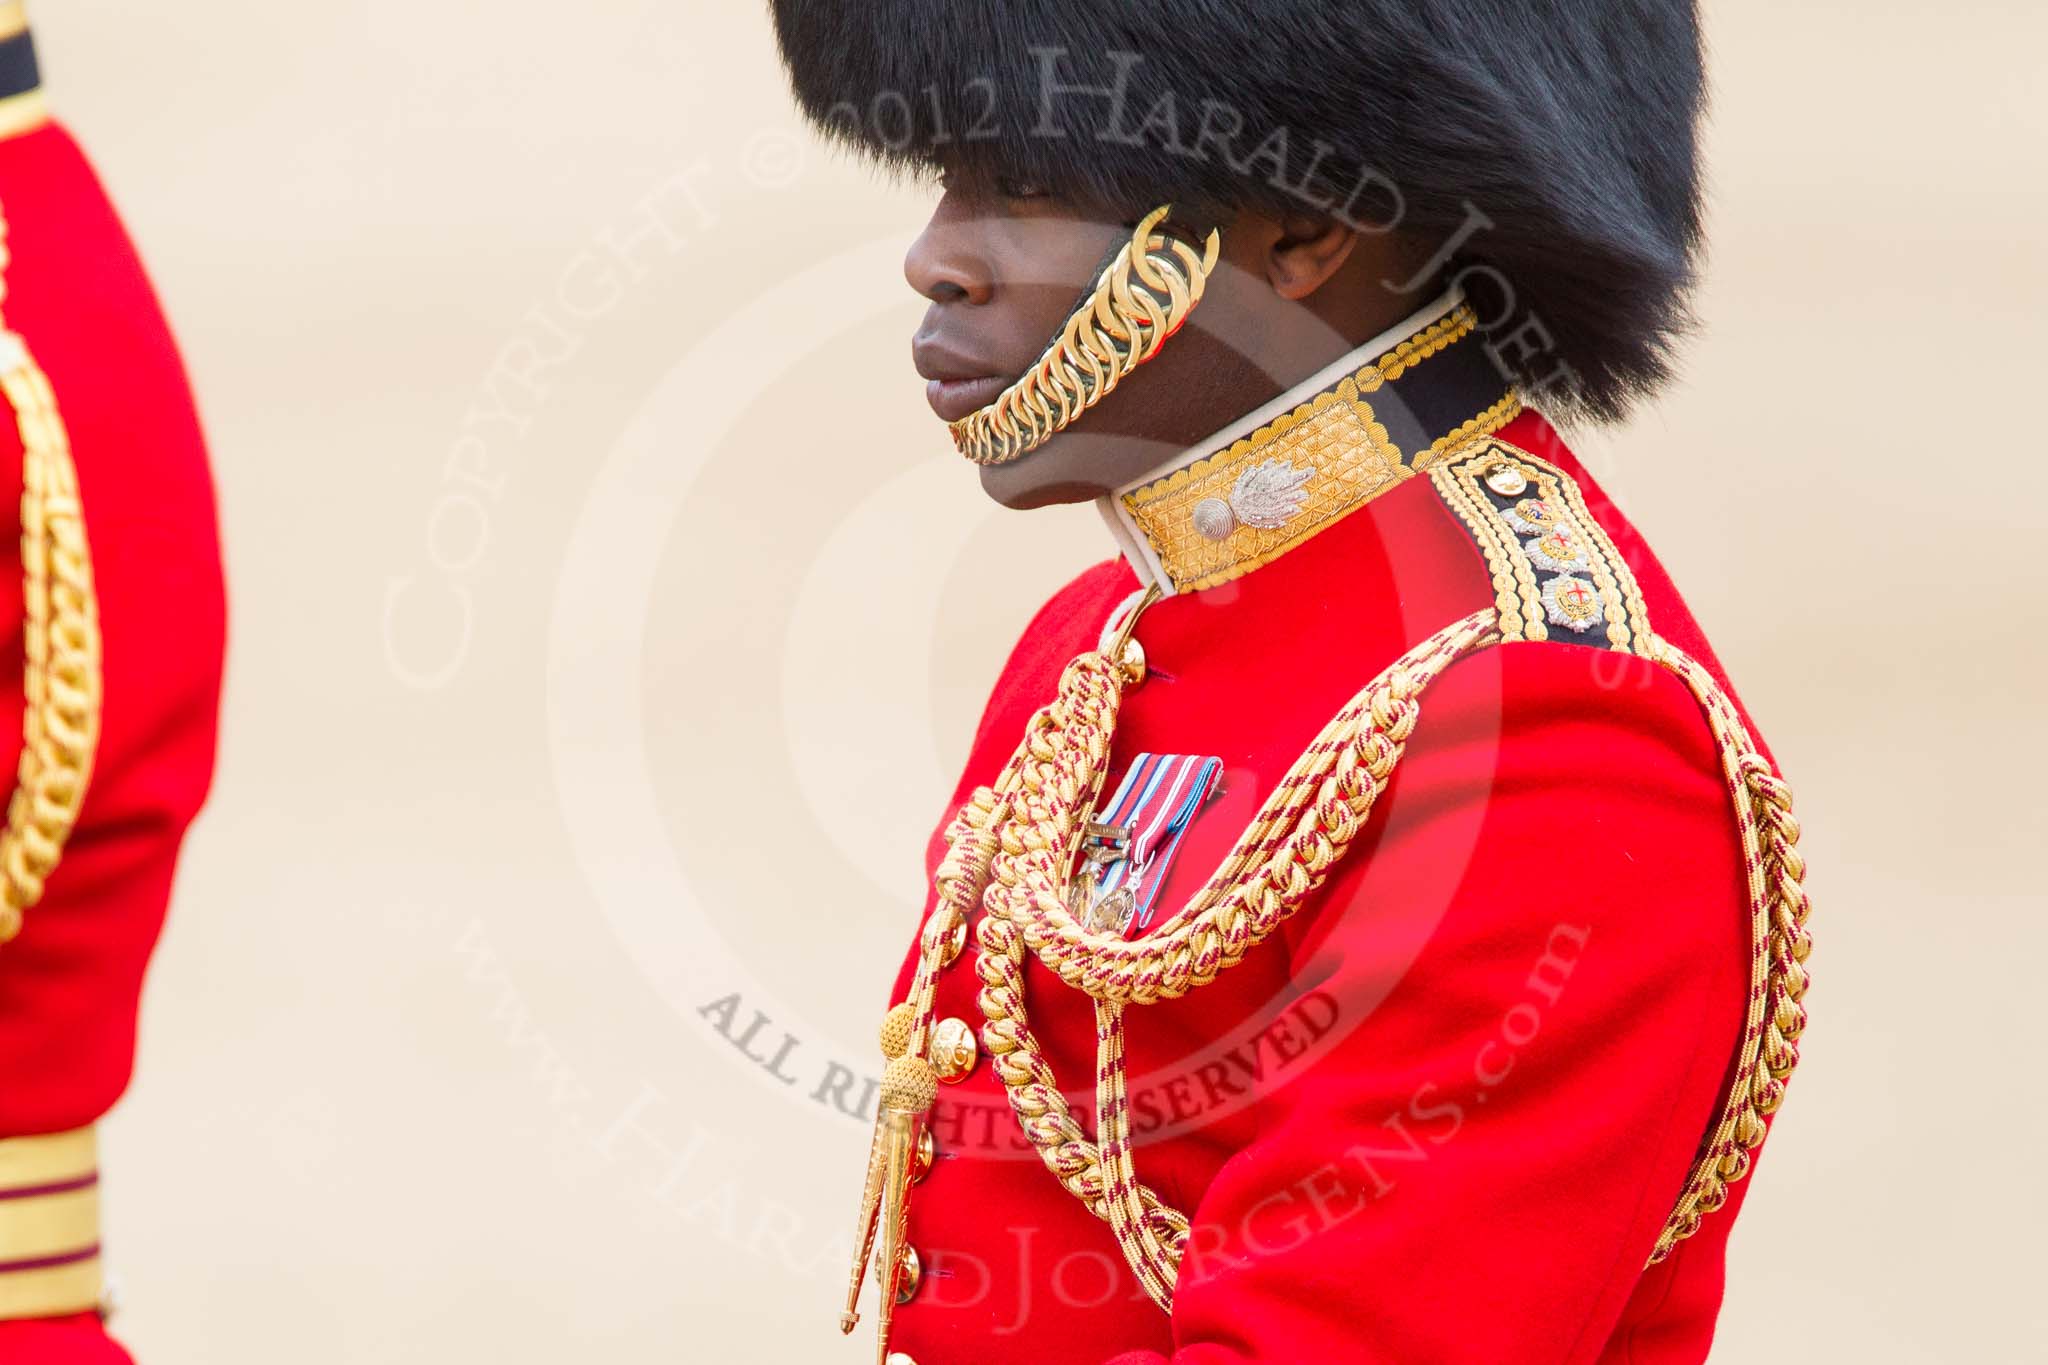 Trooping the Colour 2012: Close-up view of the Aide-de-Camp, Captain Folarin Kuku, Grenadier Guards..
Horse Guards Parade, Westminster,
London SW1,

United Kingdom,
on 16 June 2012 at 11:03, image #208